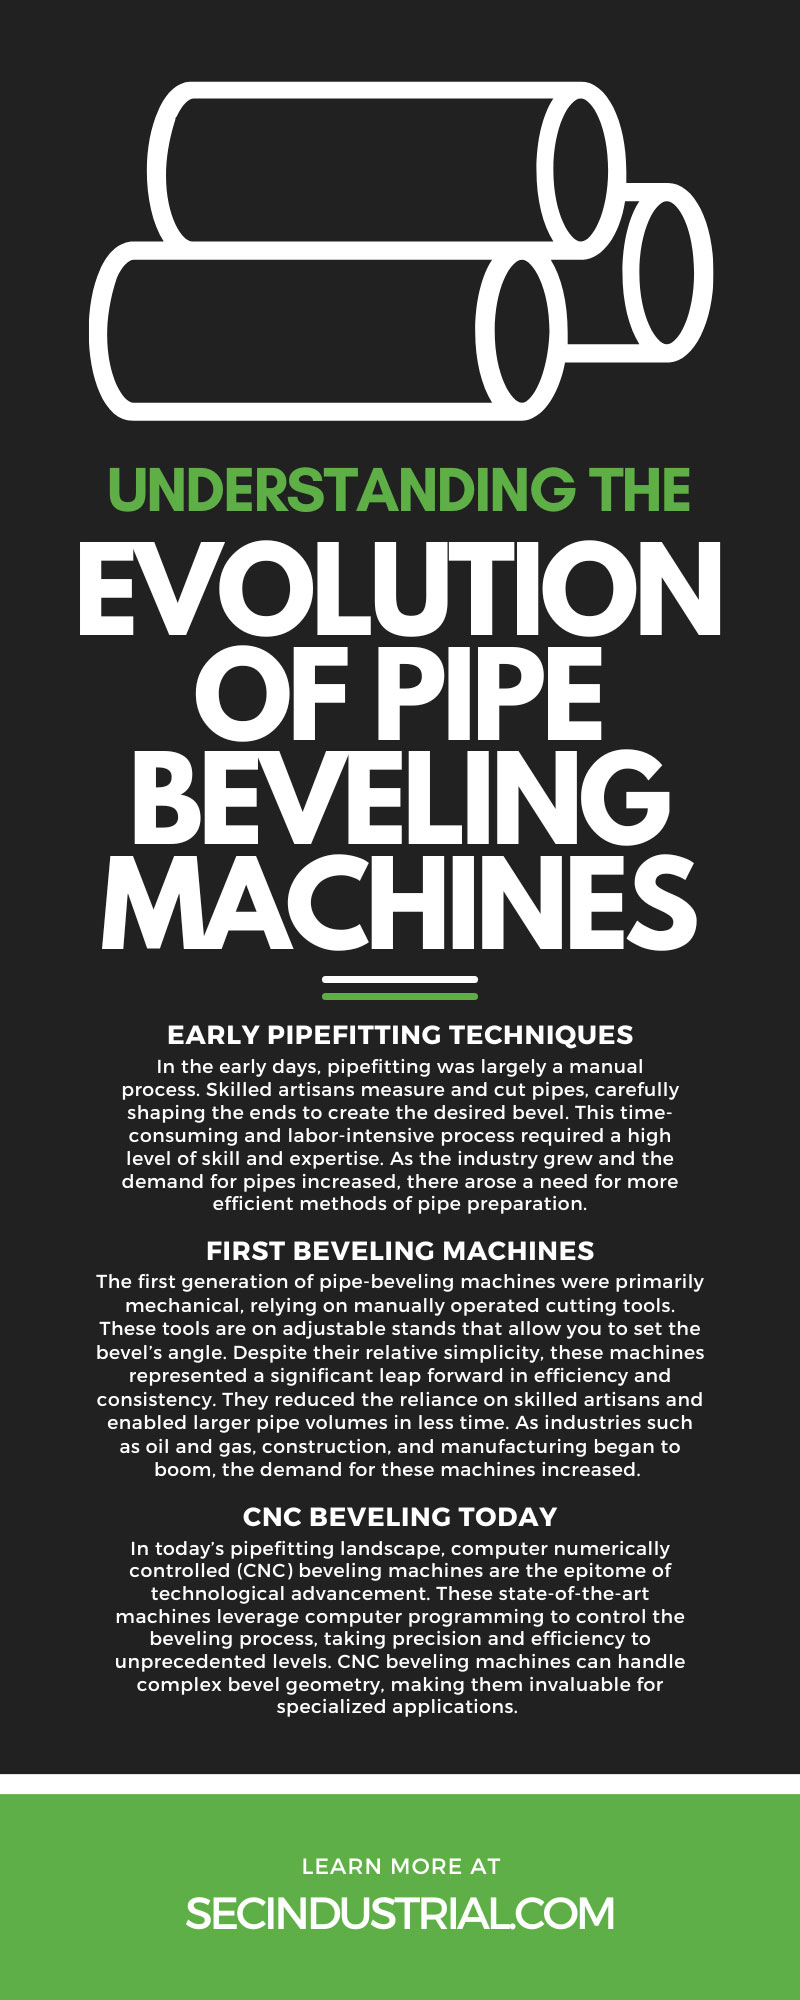 Understanding the Evolution of Pipe Beveling Machines